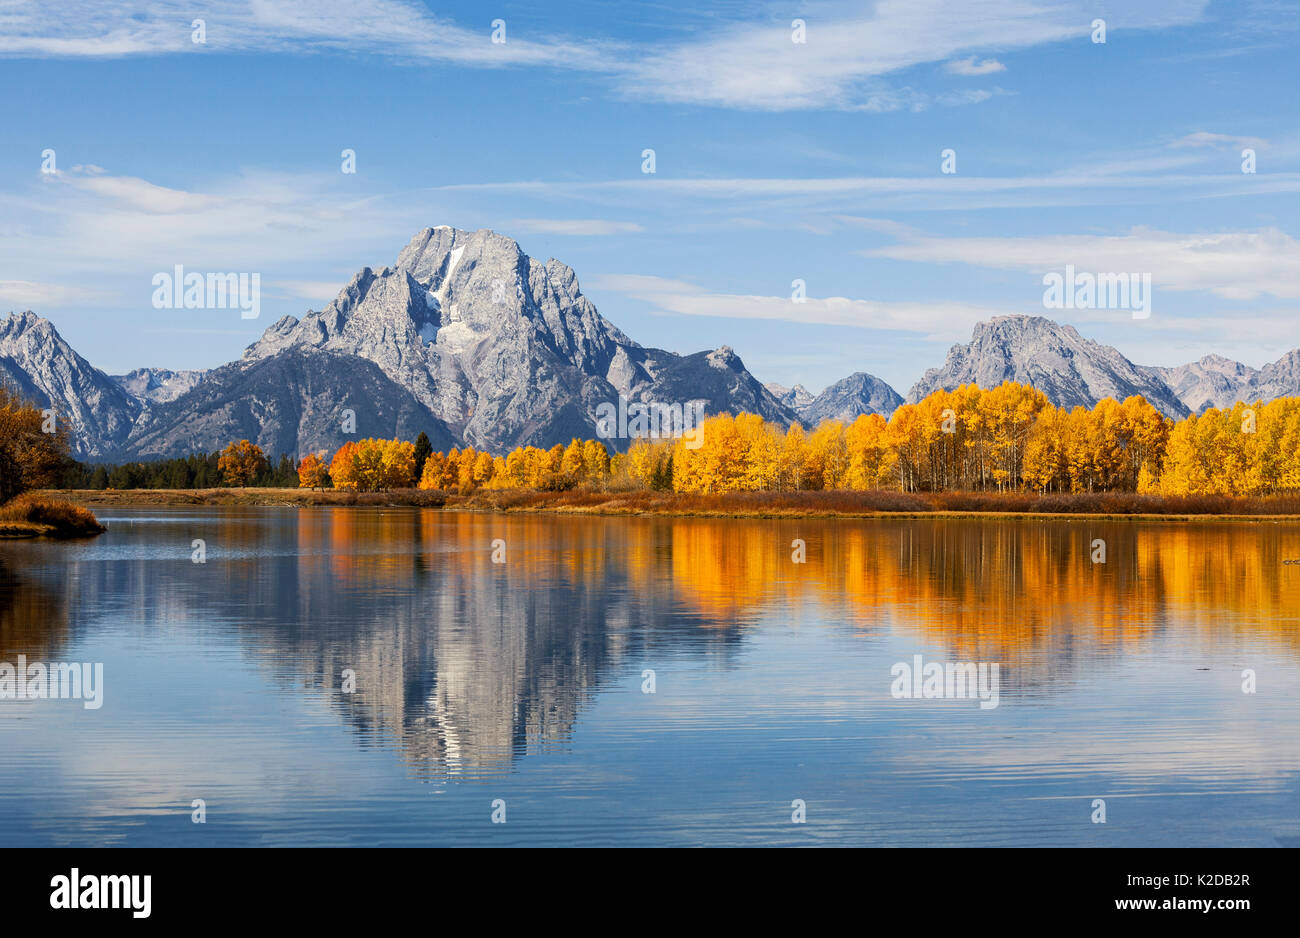 Aspen trees and Mount Moran from Ox Bow Bend on Snake River, Grand Teton National Park, Wyoming, USA. September 2015. Stock Photo